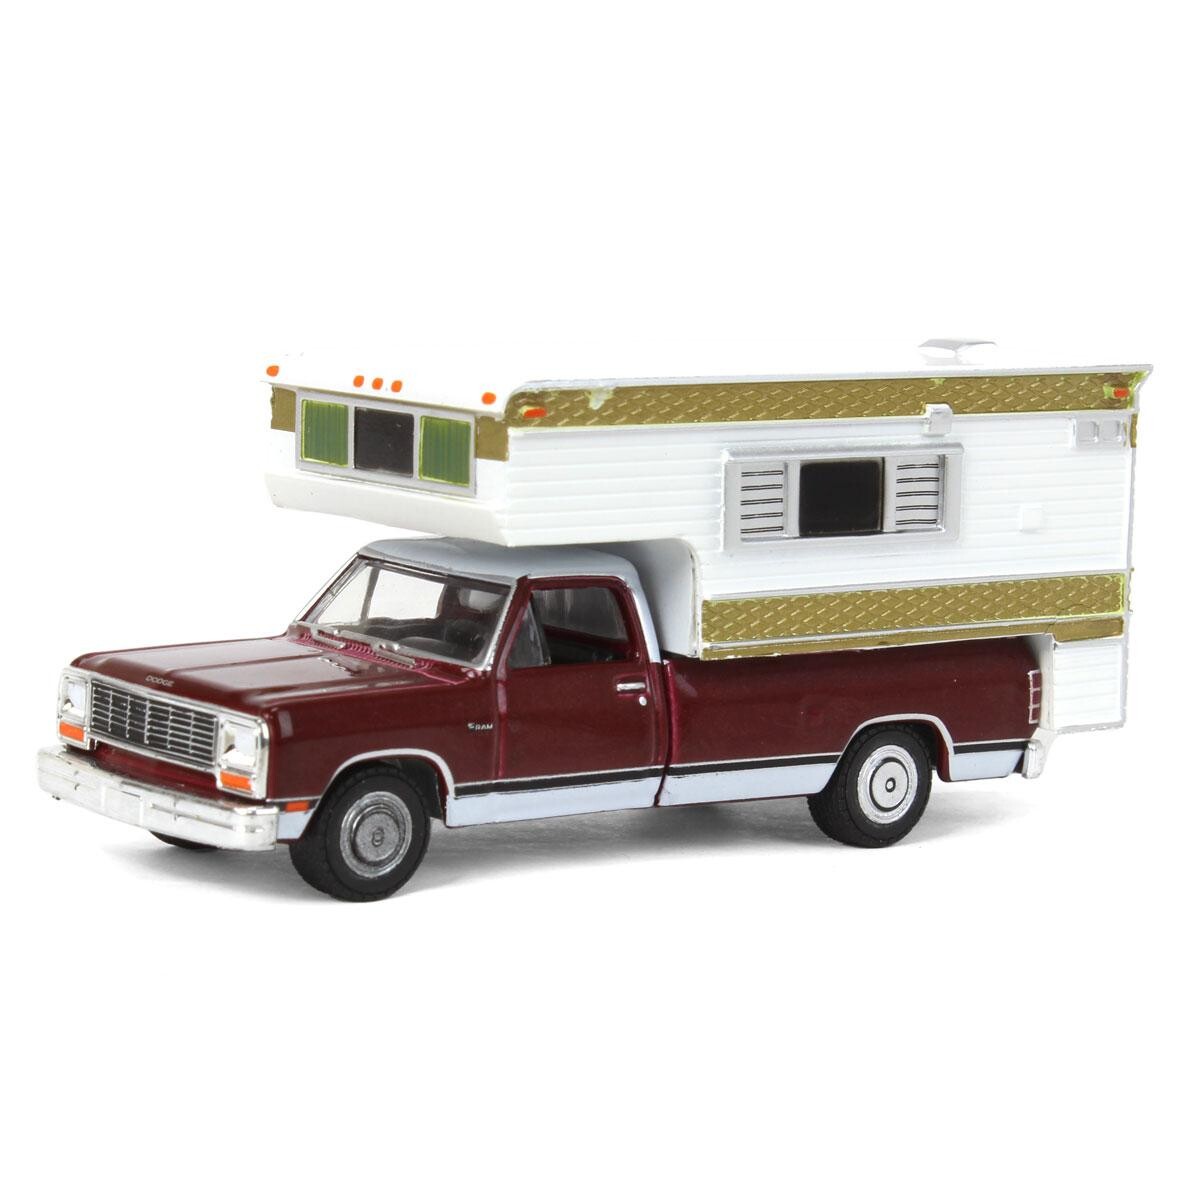 Greenlight 1/64 1981 Dodge Ram D-250 Royal with Large Camper - Medium Crimson Red and Pearl White 30409 - Thumbnail